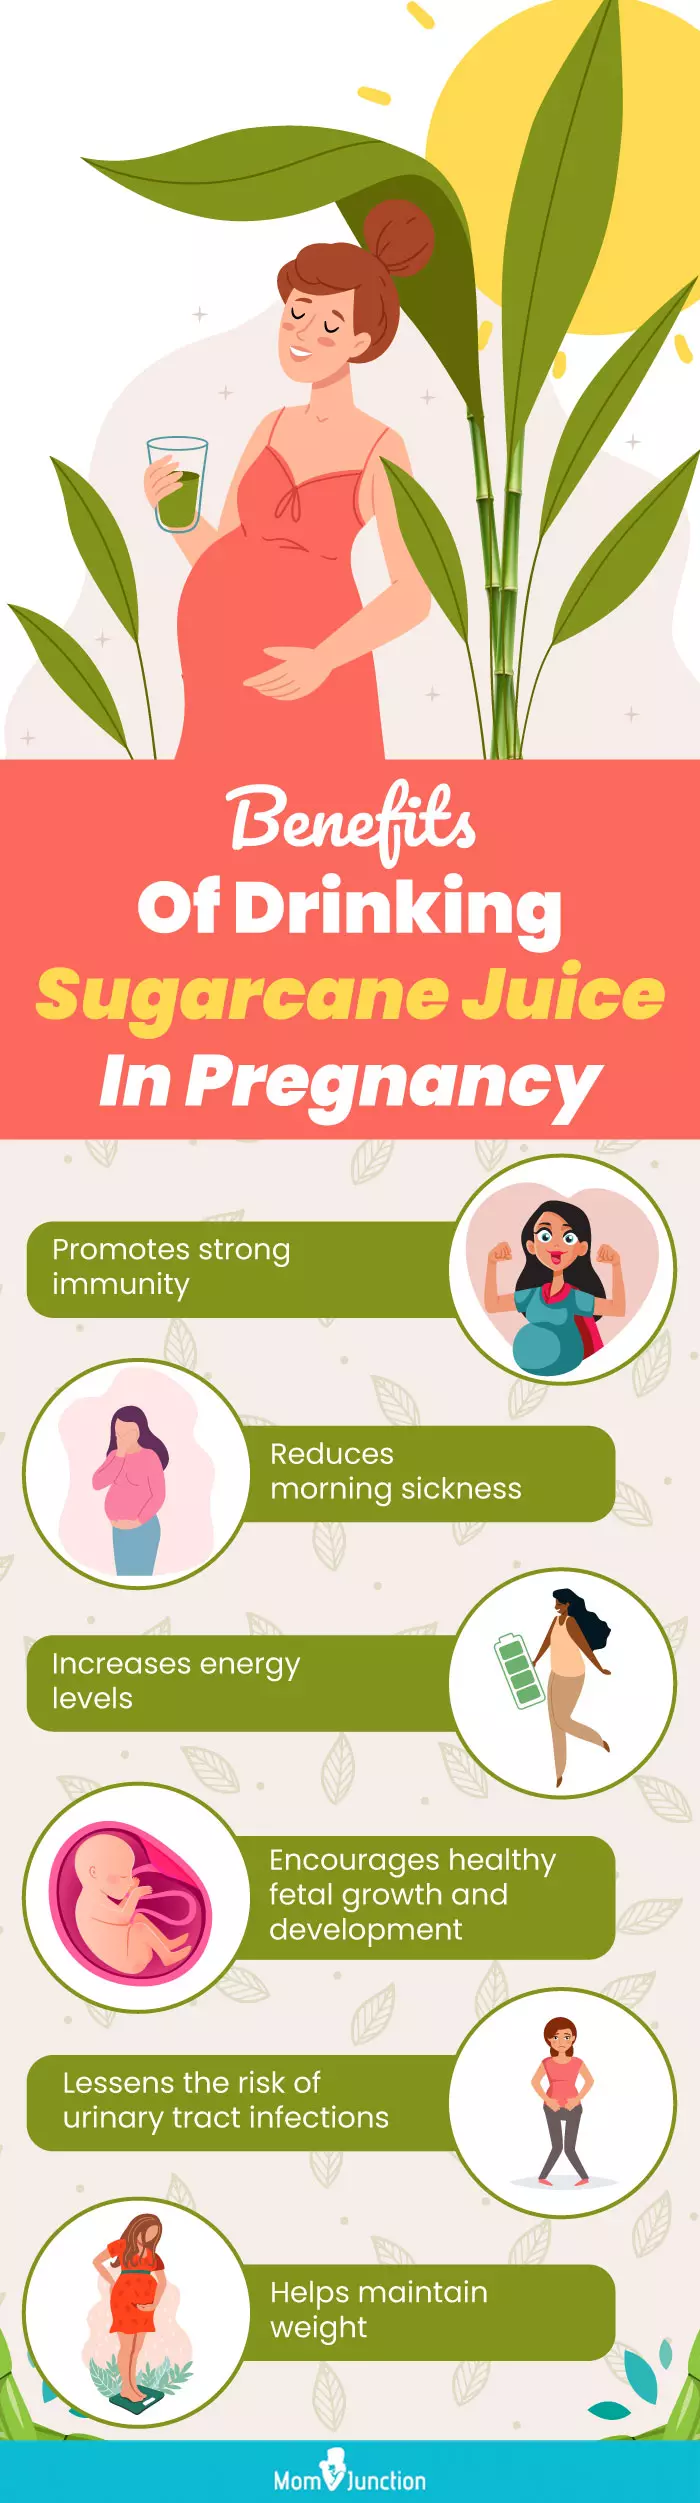 benefits of drinking sugarcane juice in pregnancy (infographic)